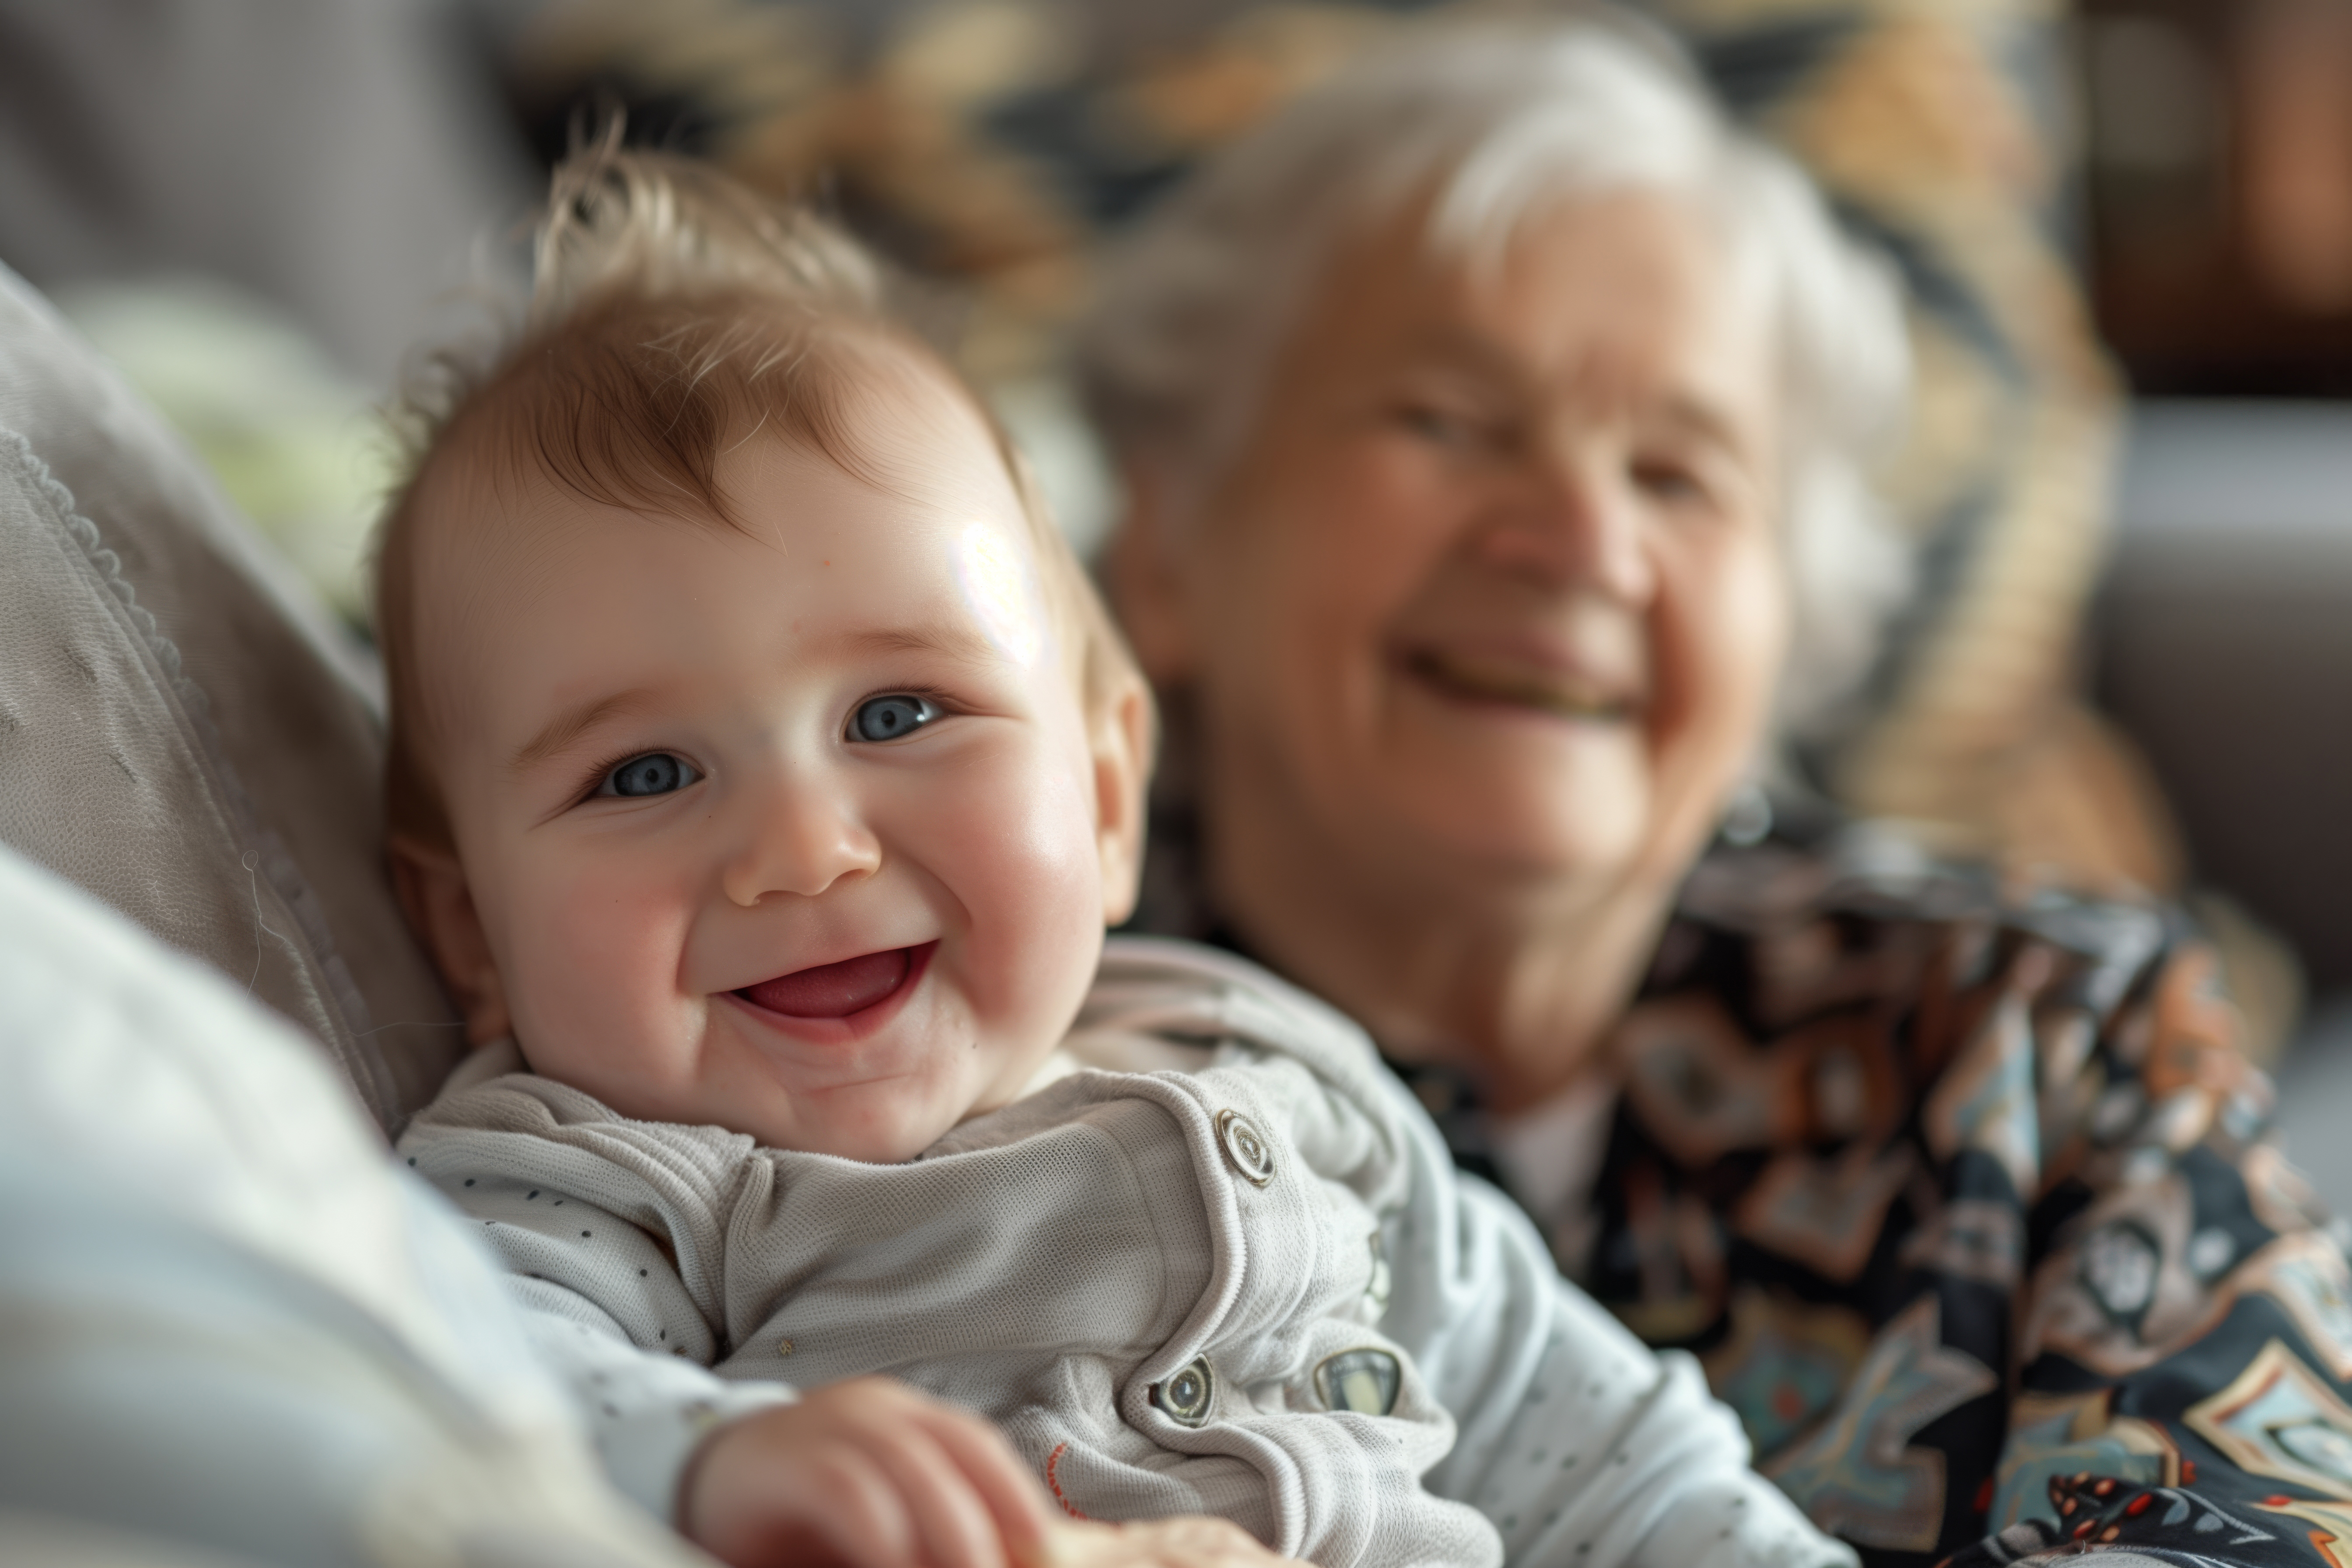 A senior woman and  a baby smiling | Source: Freepik